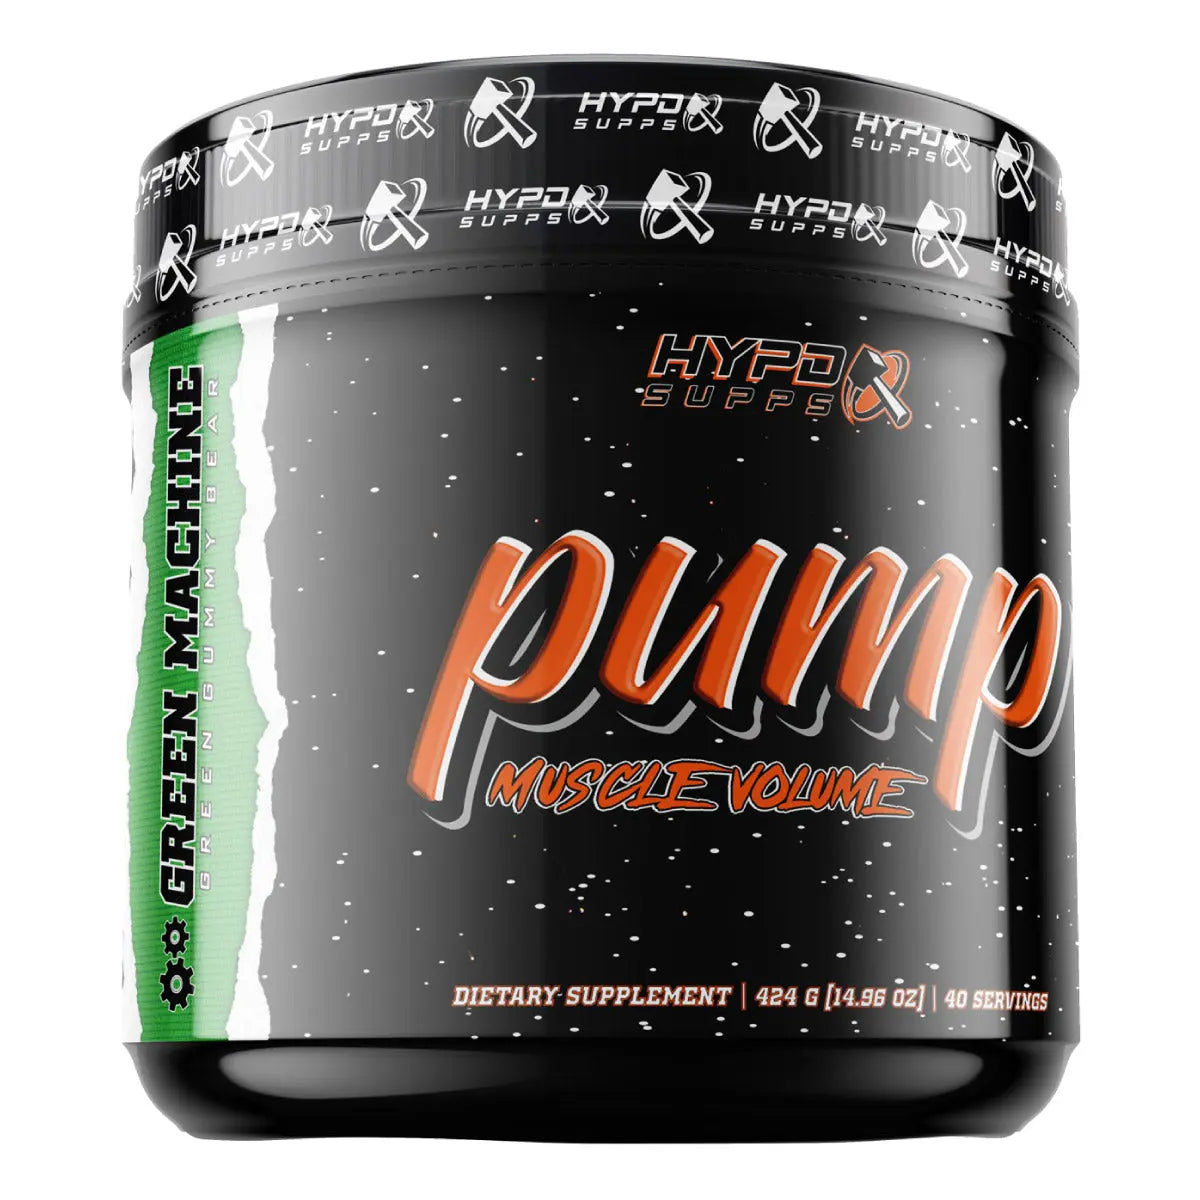 PUMP | PURE MUSCLE VOLUME hypd